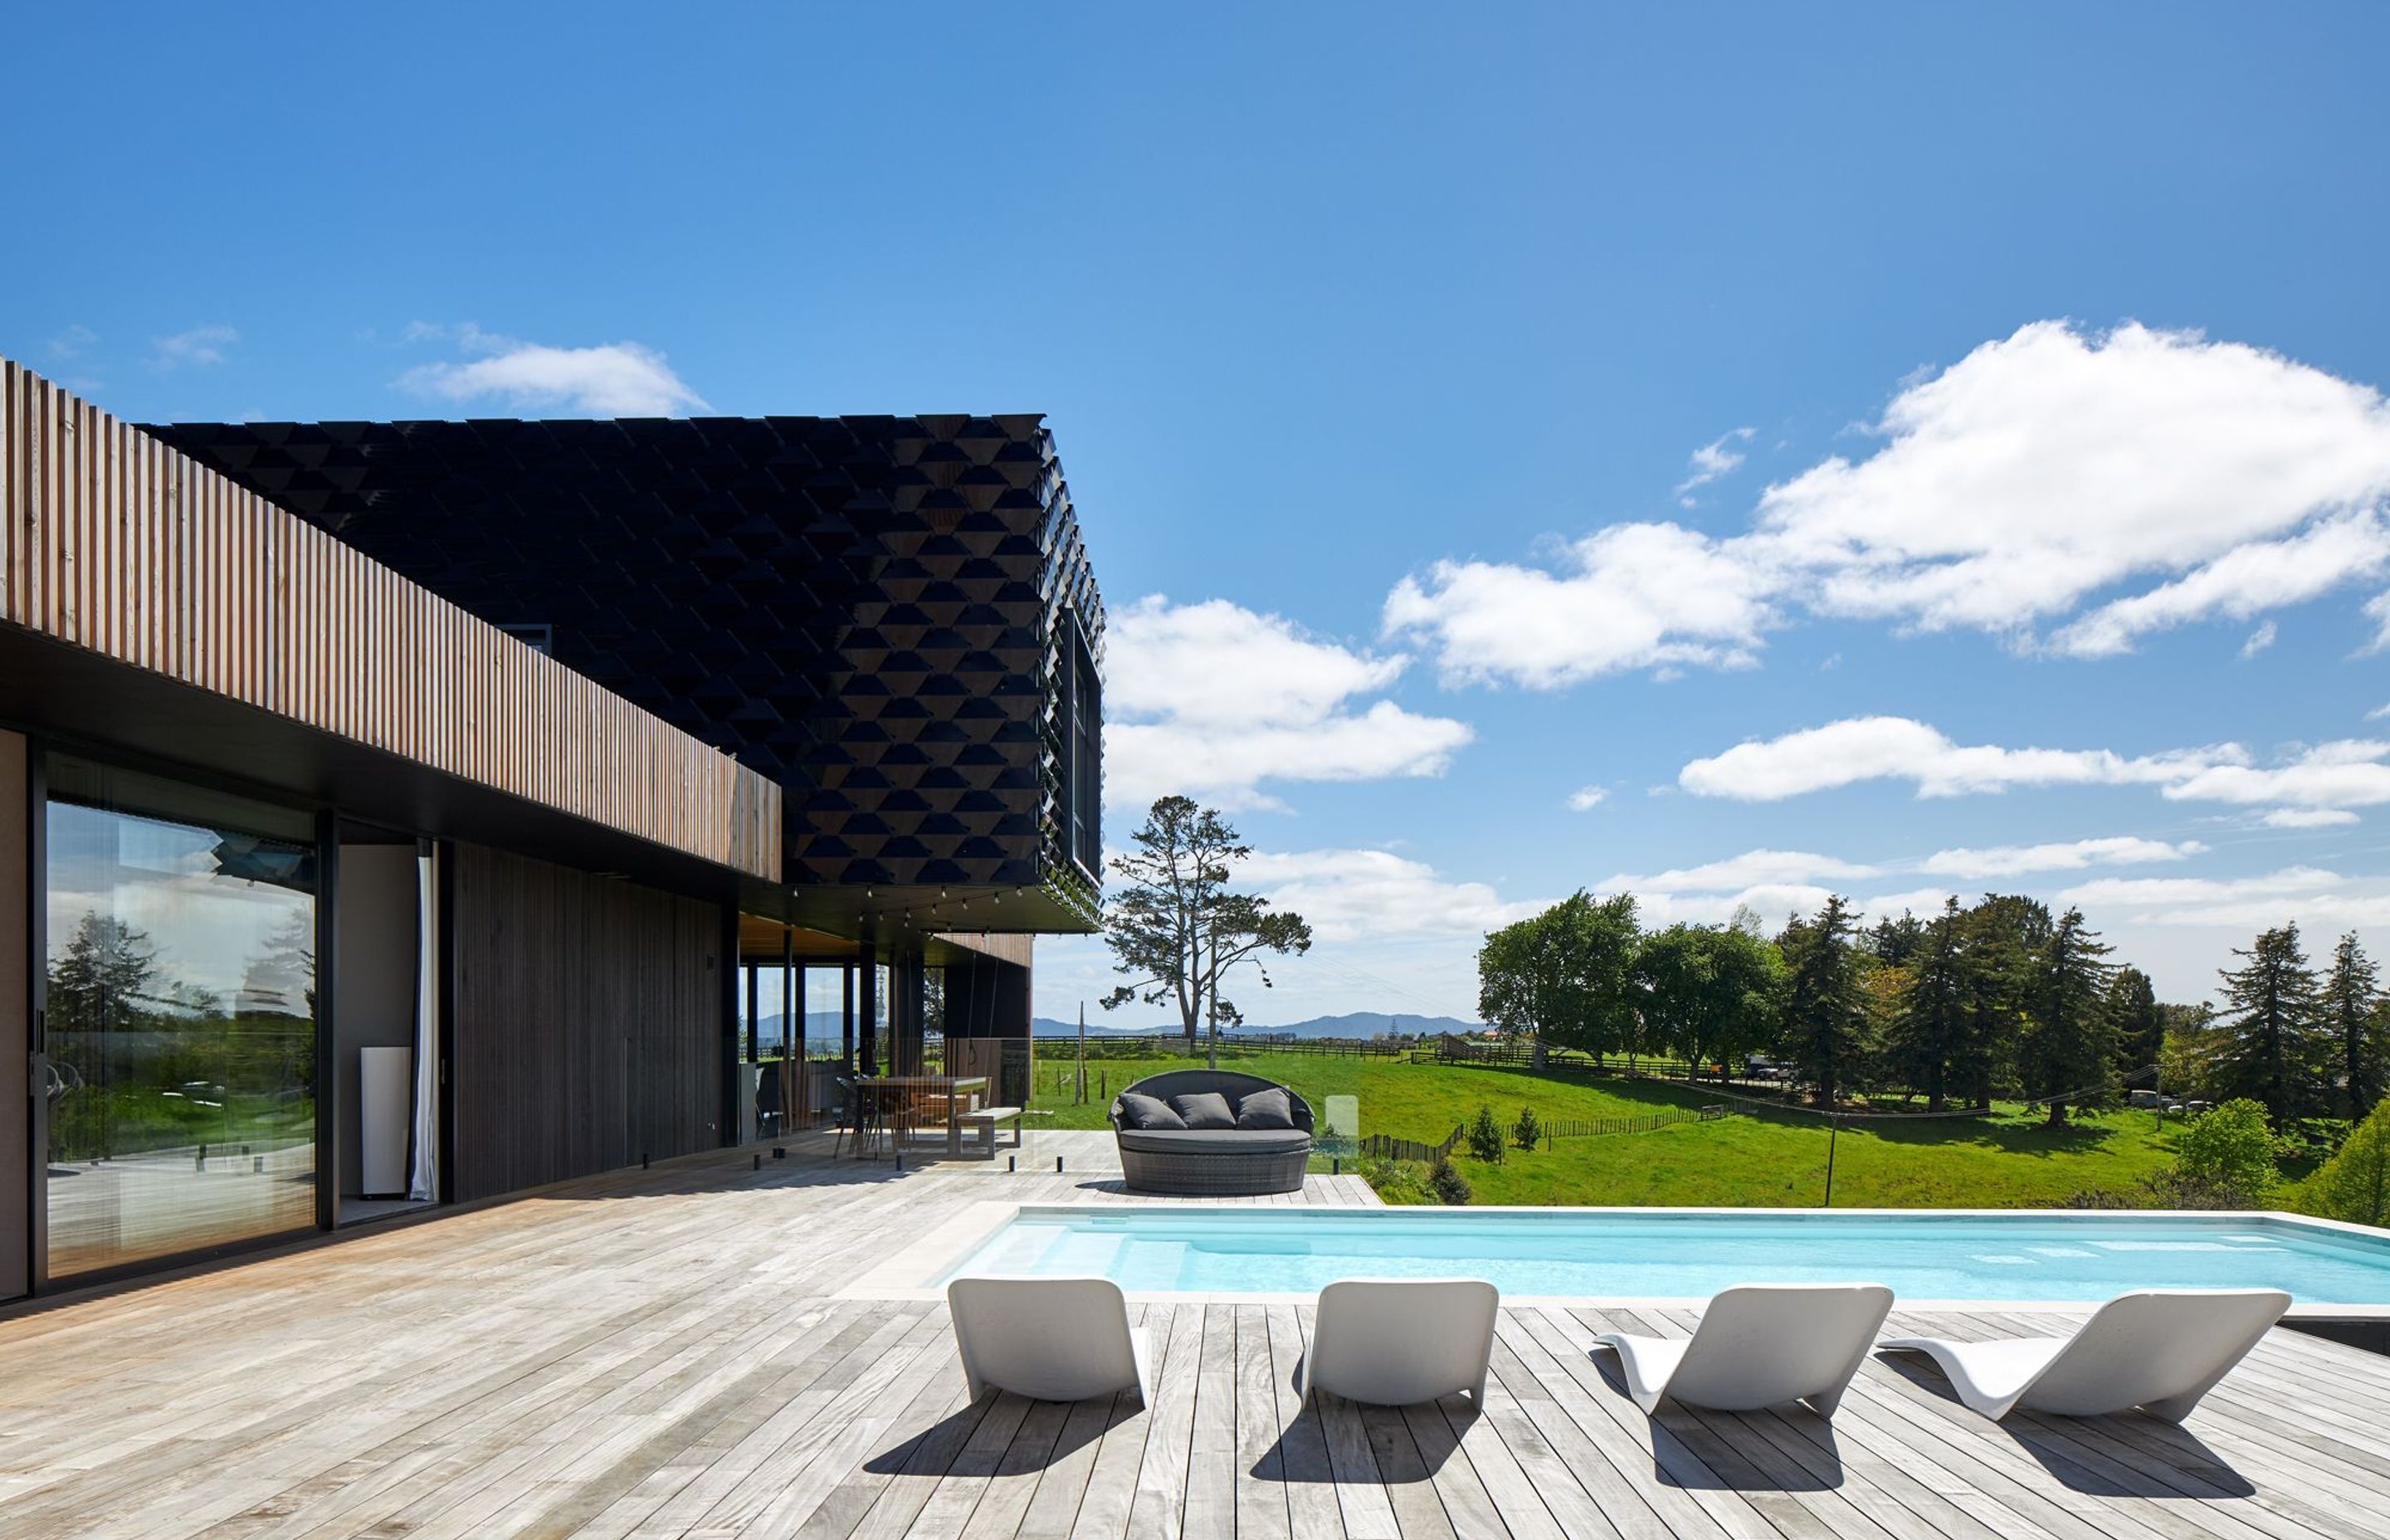 Architectural designer Noel Jessop and his wife Kylie bought an elevated section and designed their family home to take advantage of the natural setting and the wide-ranging views back towards the city.